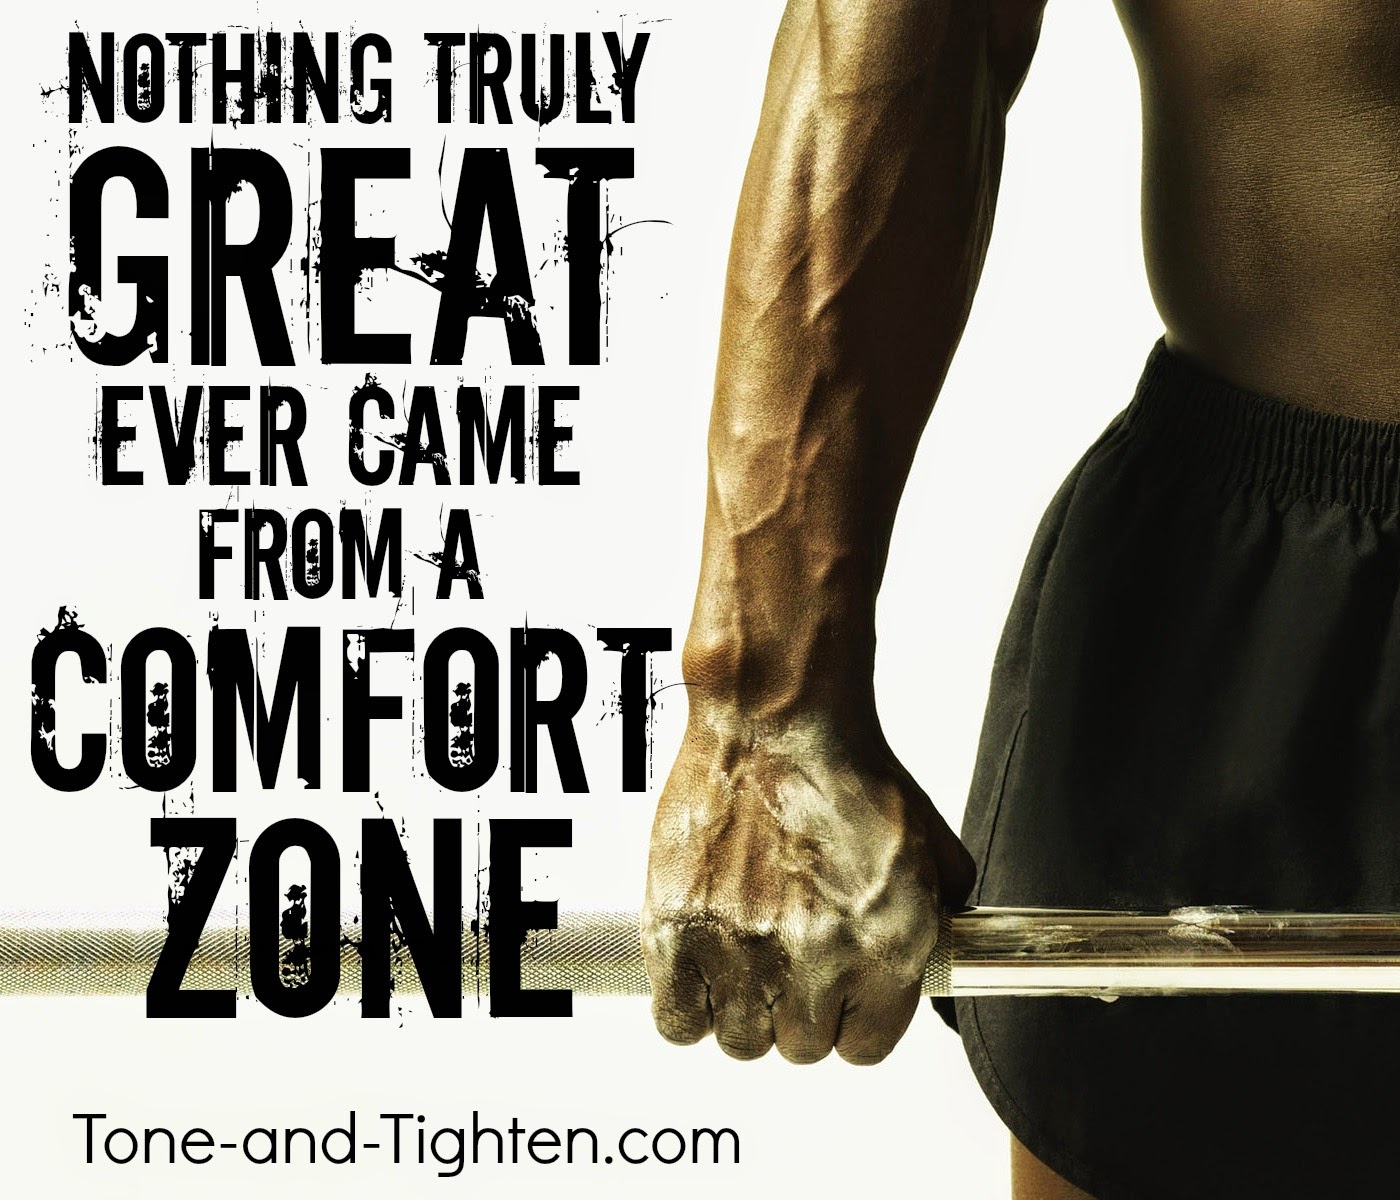 https://tone-and-tighten.com/2014/05/fitness-motivation-exercise-inspiration-get-out-of-your-comfort-zone.html